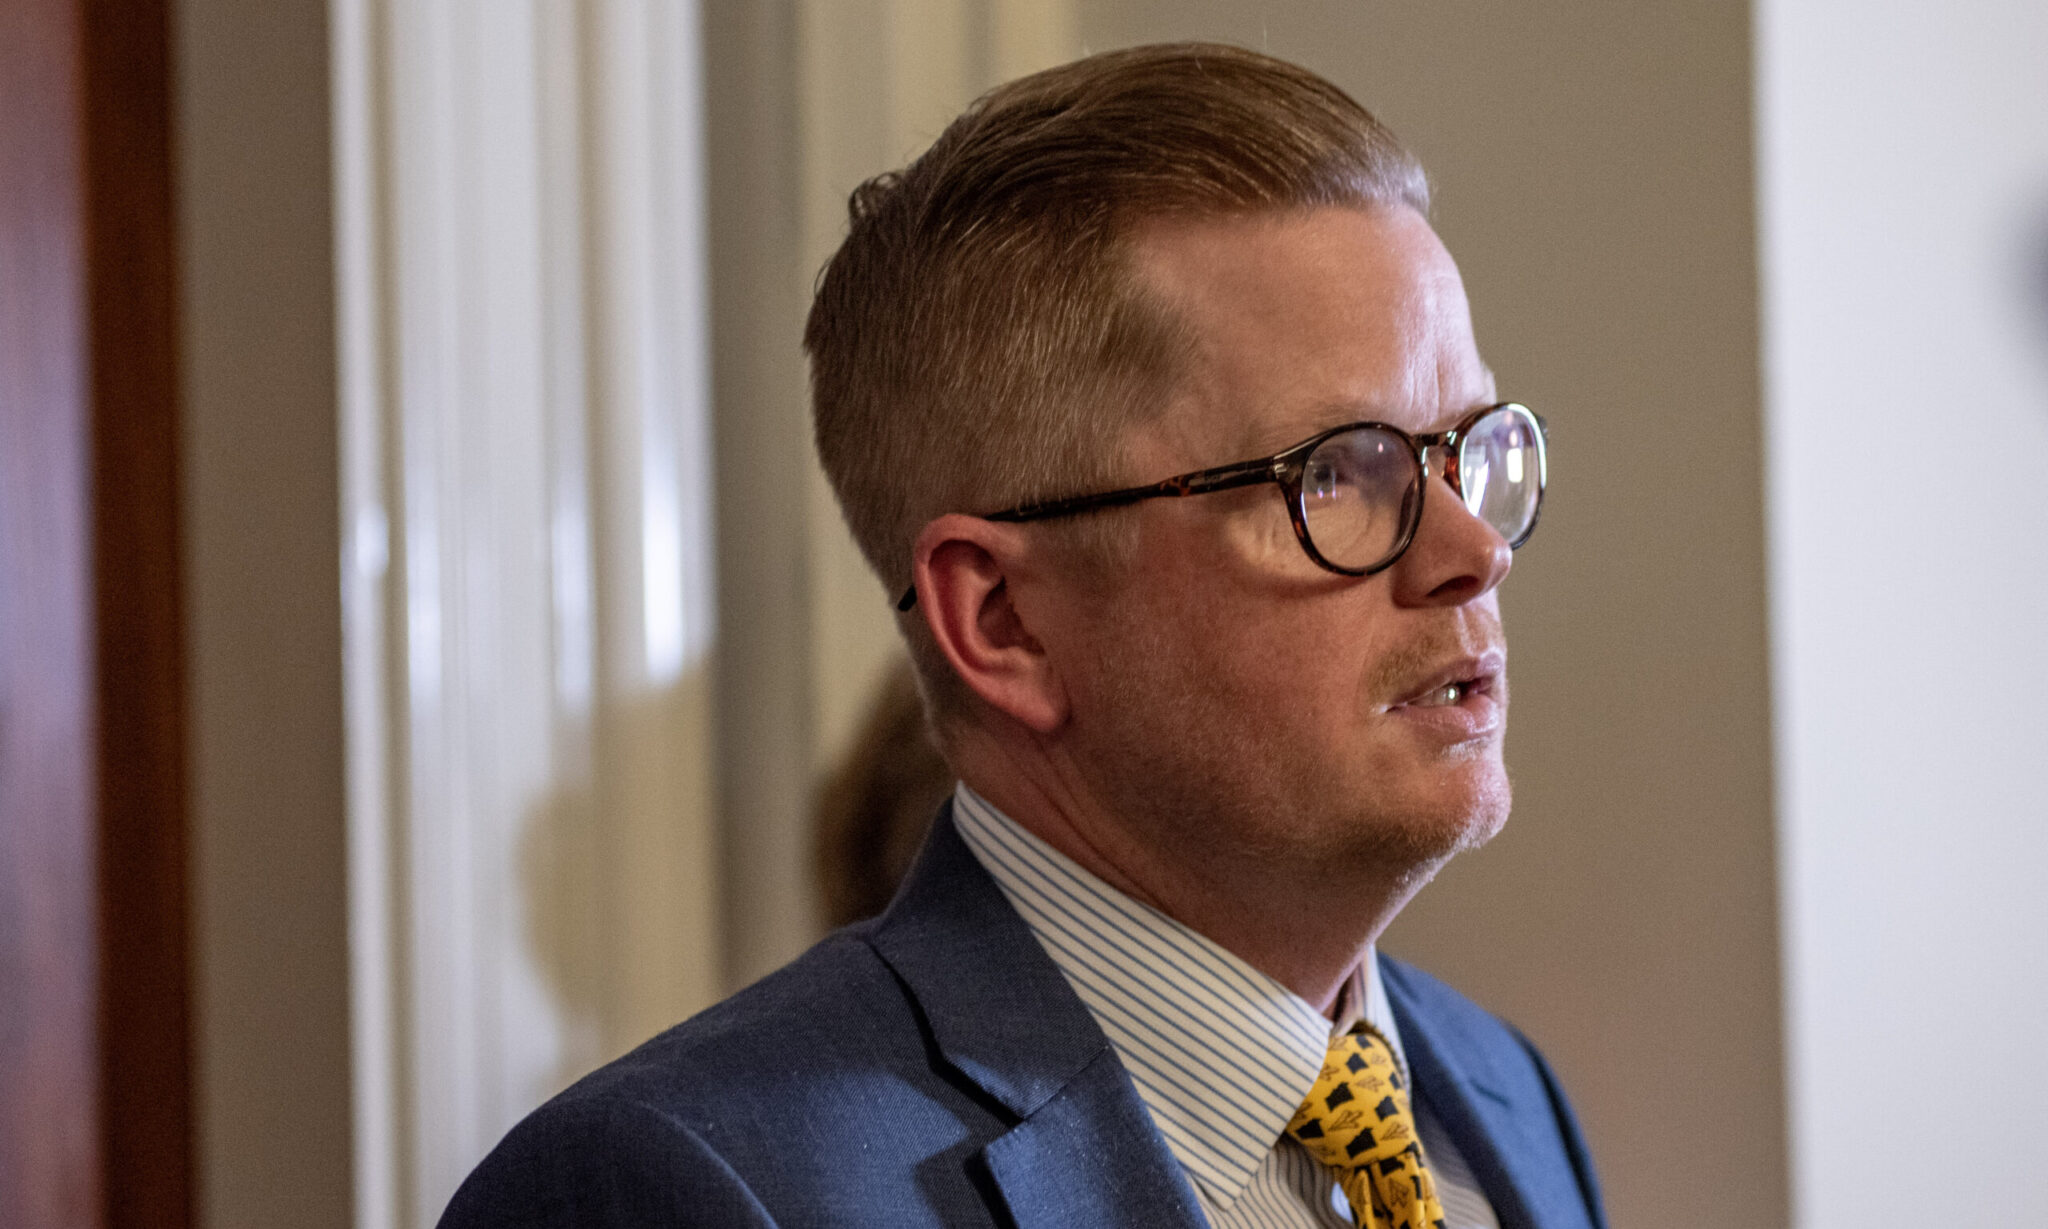 Missouri Senate President Pro Tem Caleb Rowden, R-Columbia, addresses reporters outside his office about the decision to remove Freedom Caucus members from their committee asssignments (Annelise Hanshaw/Missouri Independent).